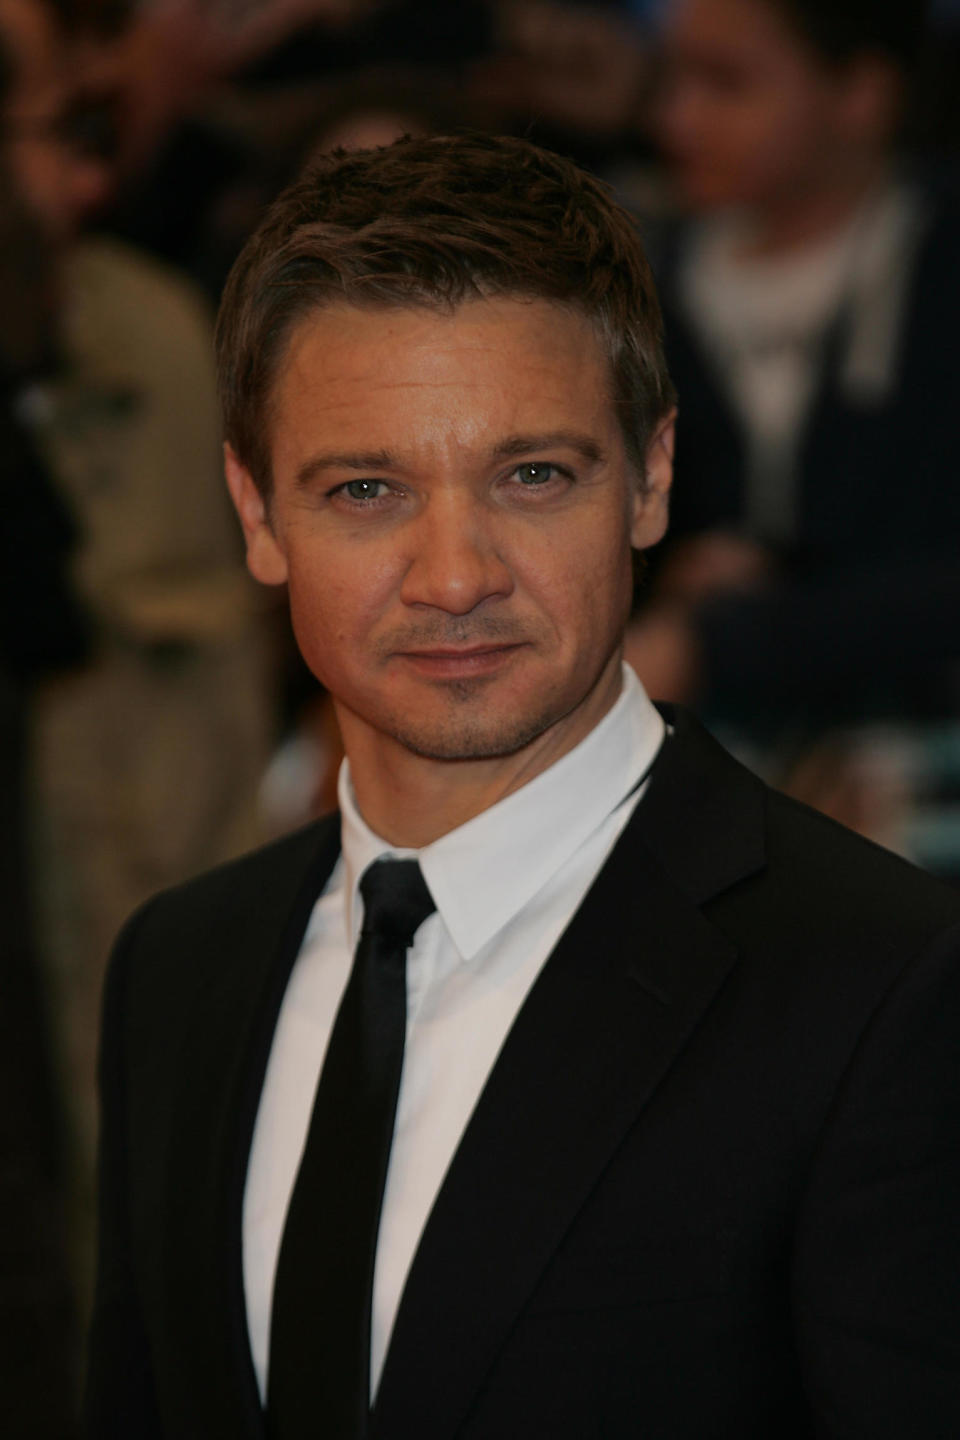 The hunky star of "The Avengers" blasted persistent rumors about his sexuality -- as well as probes into his personal life in general -- earlier this month.   "I want my personal life to be personal, and it's not f***ing true," Renner, 41,<a href="http://www.huffingtonpost.com/2012/04/04/jeremy-renner-blasts-gay-rumors_n_1403859.html" target="_hplink"> is quoted as saying</a>. "And I don't care if you're talking about things that are true, you're still talking about my personal life.. How about I go peek in your window, take what underwear you wore last night, whose husband you were f***ing, and shove that in the megaphone throughout your neighborhood? How does that feel?"